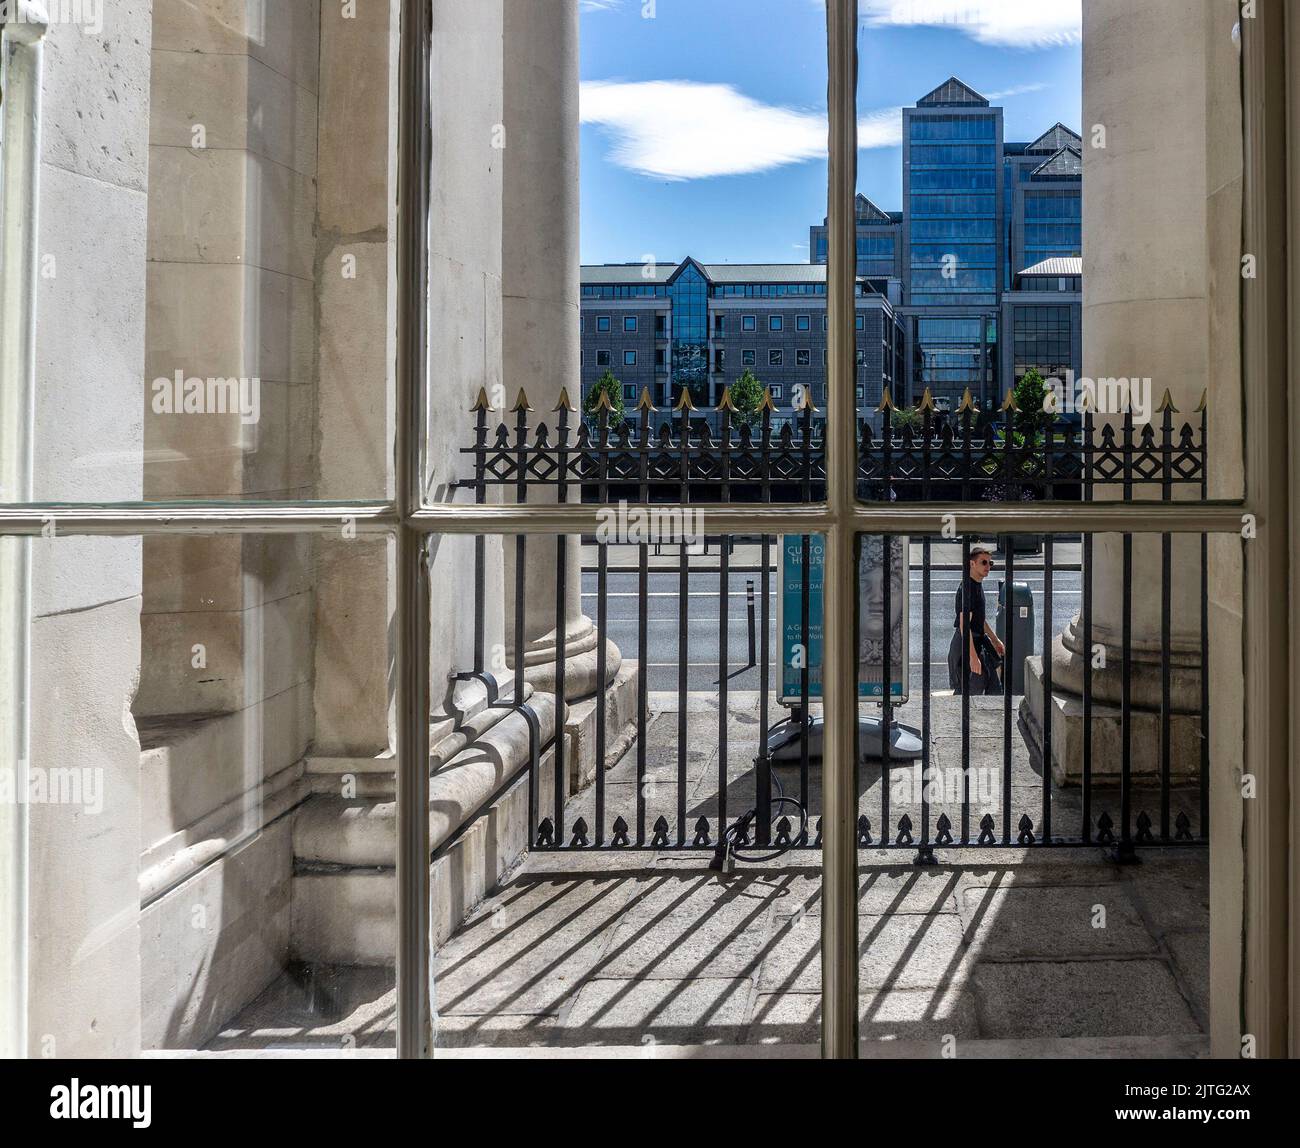 The Ulster Bank Headquarters on Georges Quay in Dublin, Ireland viewed through a window of the Customs House  on Custom House Quay. Stock Photo